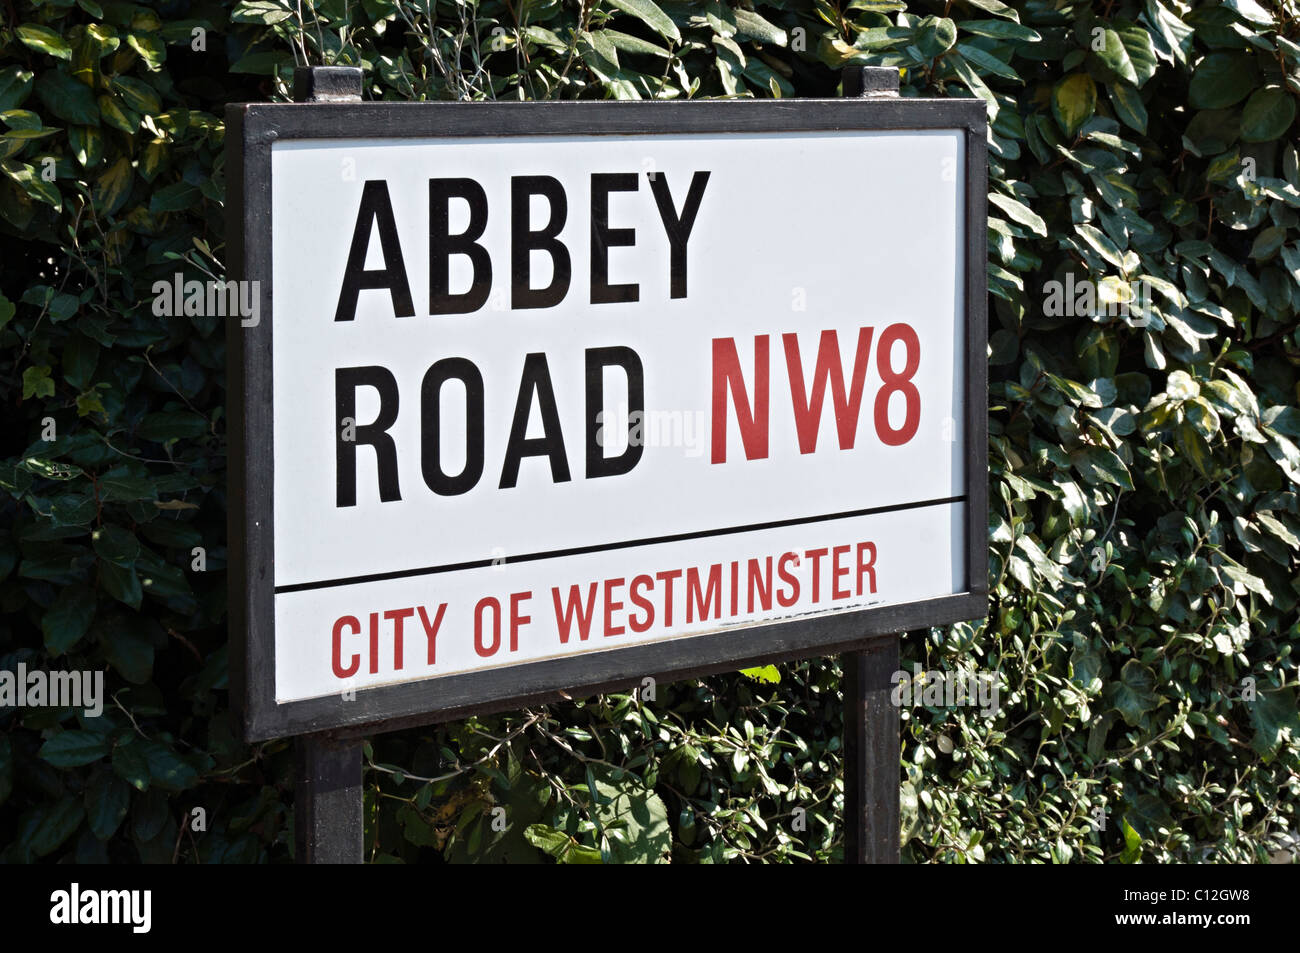 Abbey Road NW8 road sign, London Stock Photo